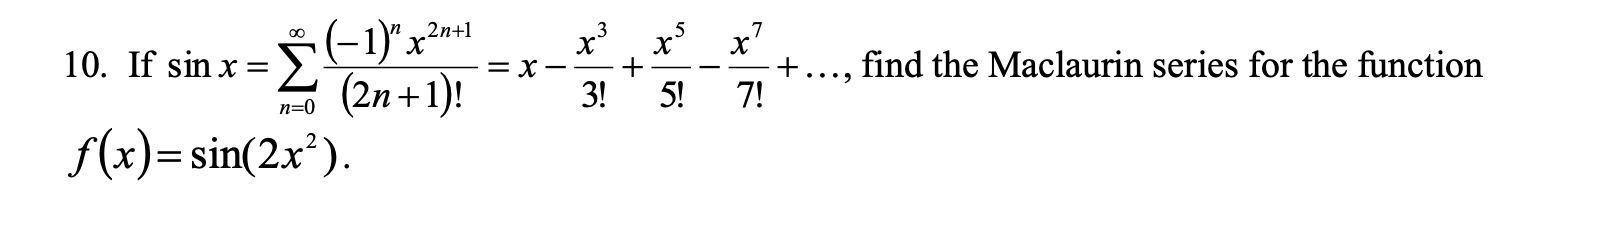 (-1)"x
(2n +1)!
f(x)= sin(2x²).
2n+1
.3
x'
+
7!
10. If sin x =
find the Maclaurin series for the function
+
3!
5!
= X
....
n=0
